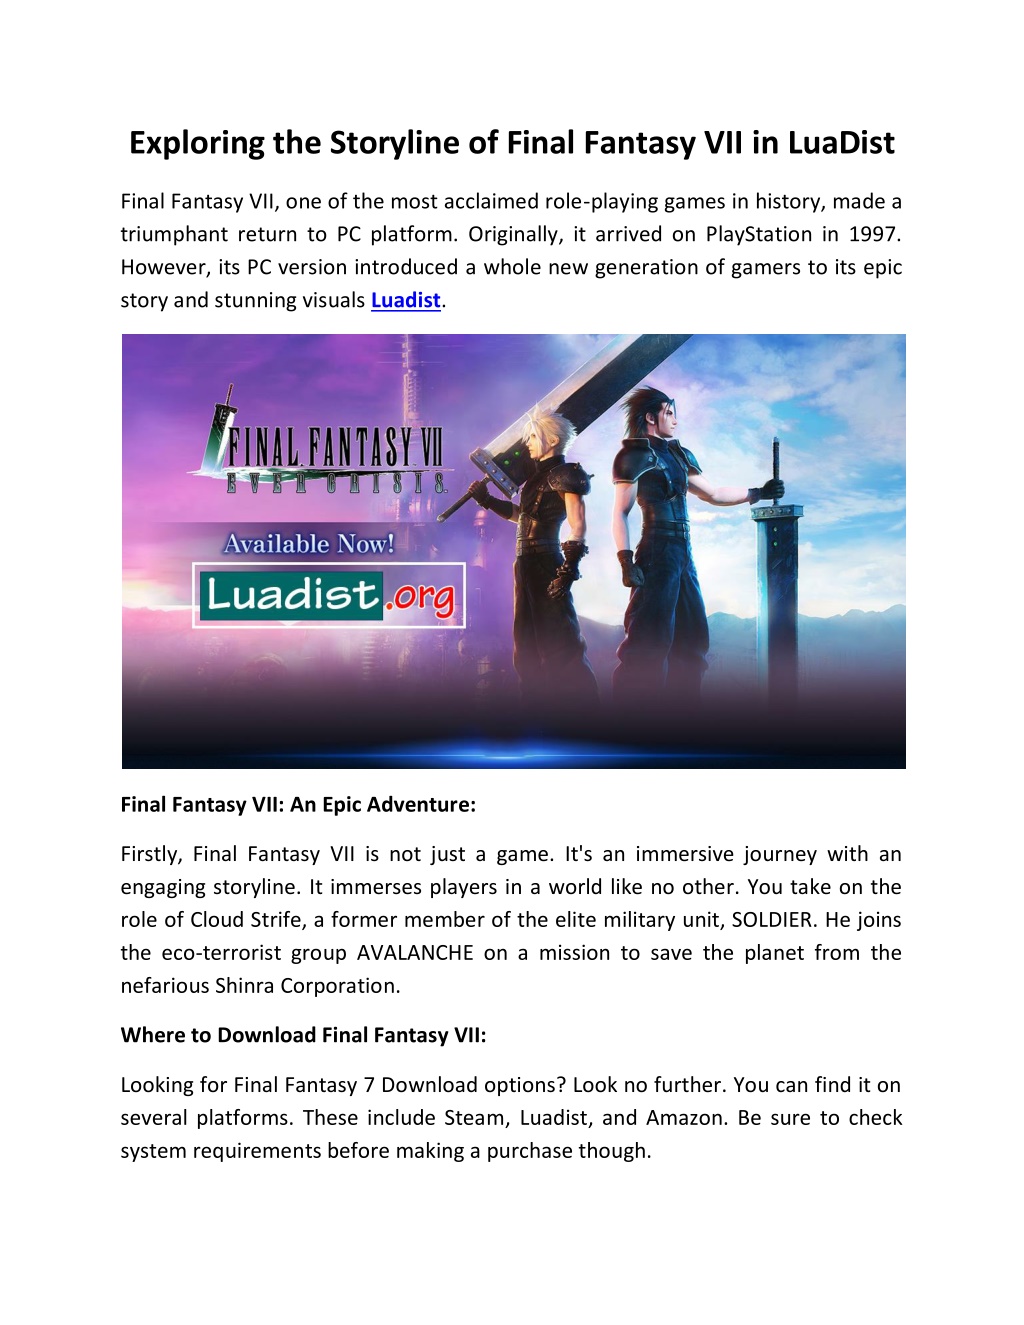 PPT - Exploring the Storyline of Final Fantasy VII in LuaDist PowerPoint  Presentation - ID:12930775